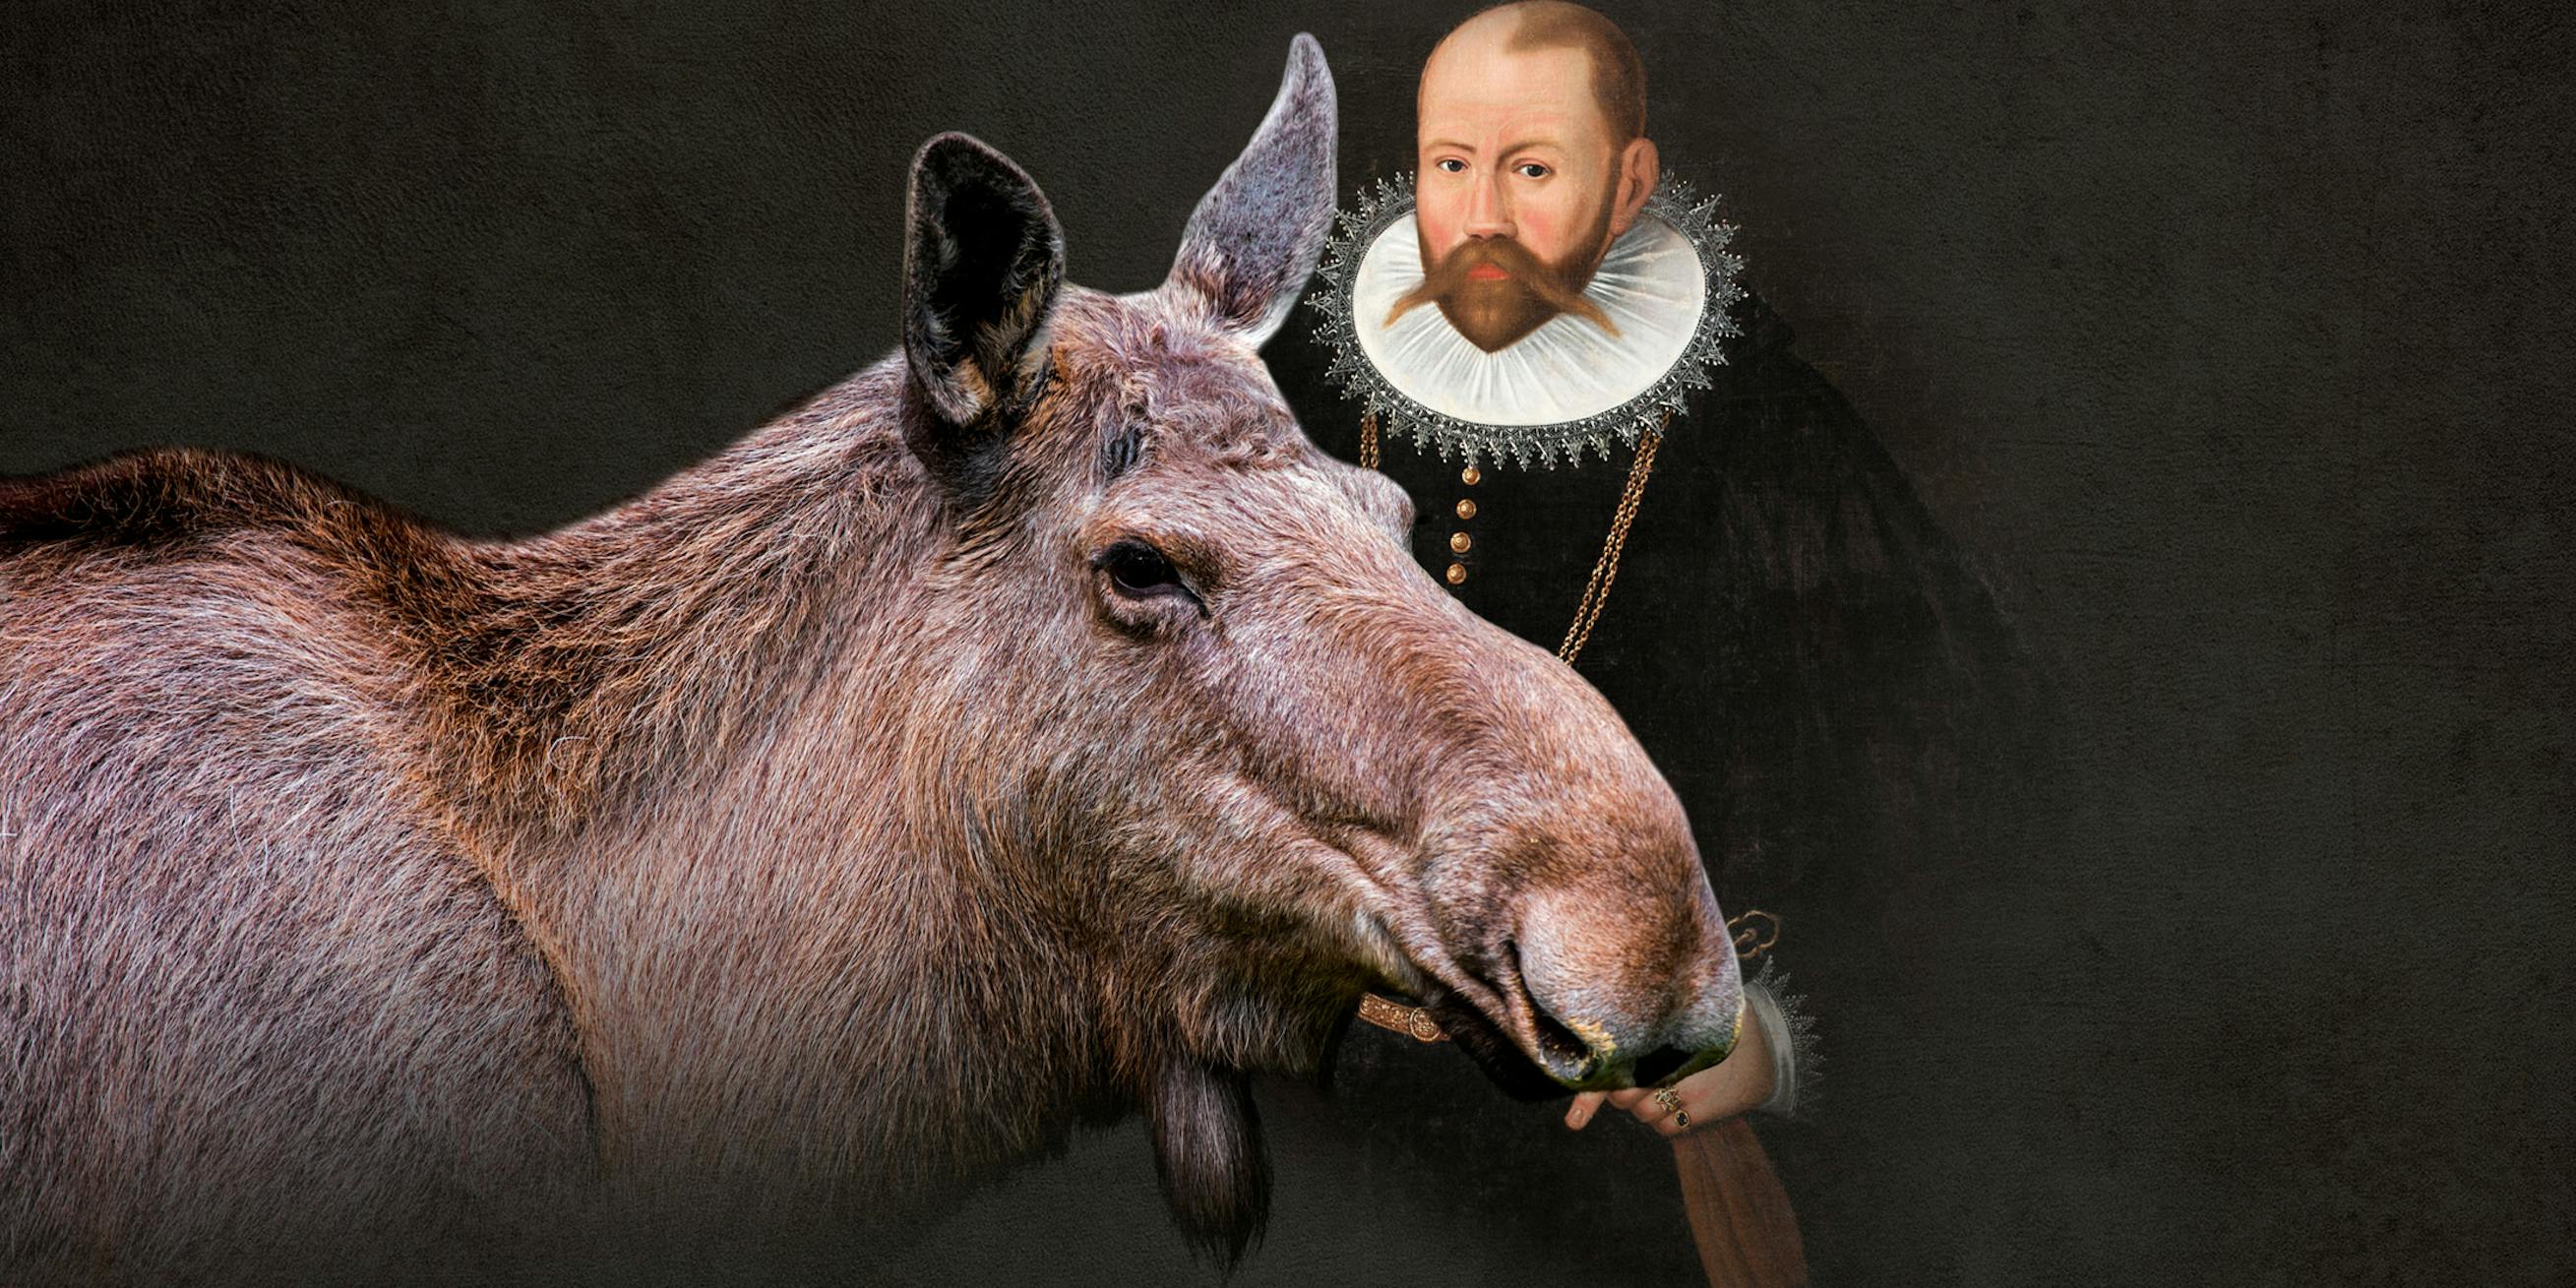 Tycho Brahes tamme elg